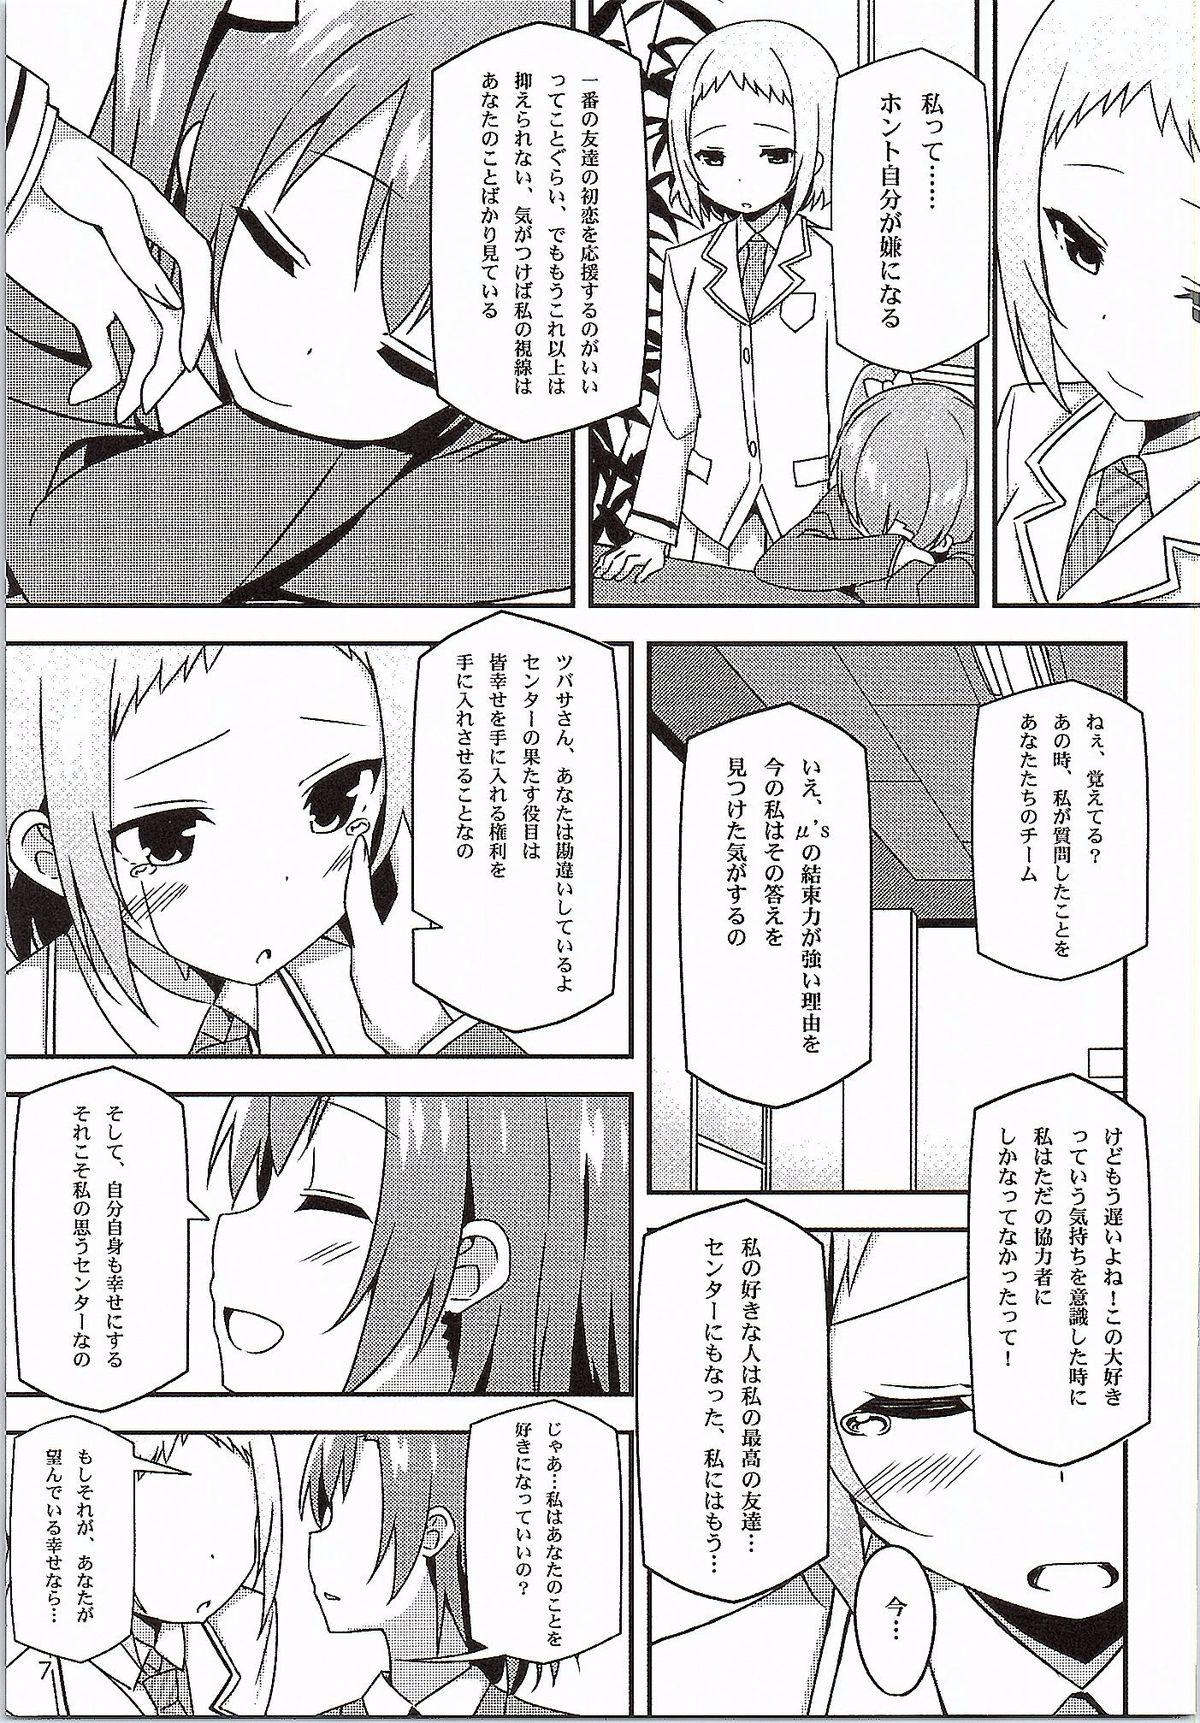 Spoon Endless Love - Love live Hot Naked Women - Page 6